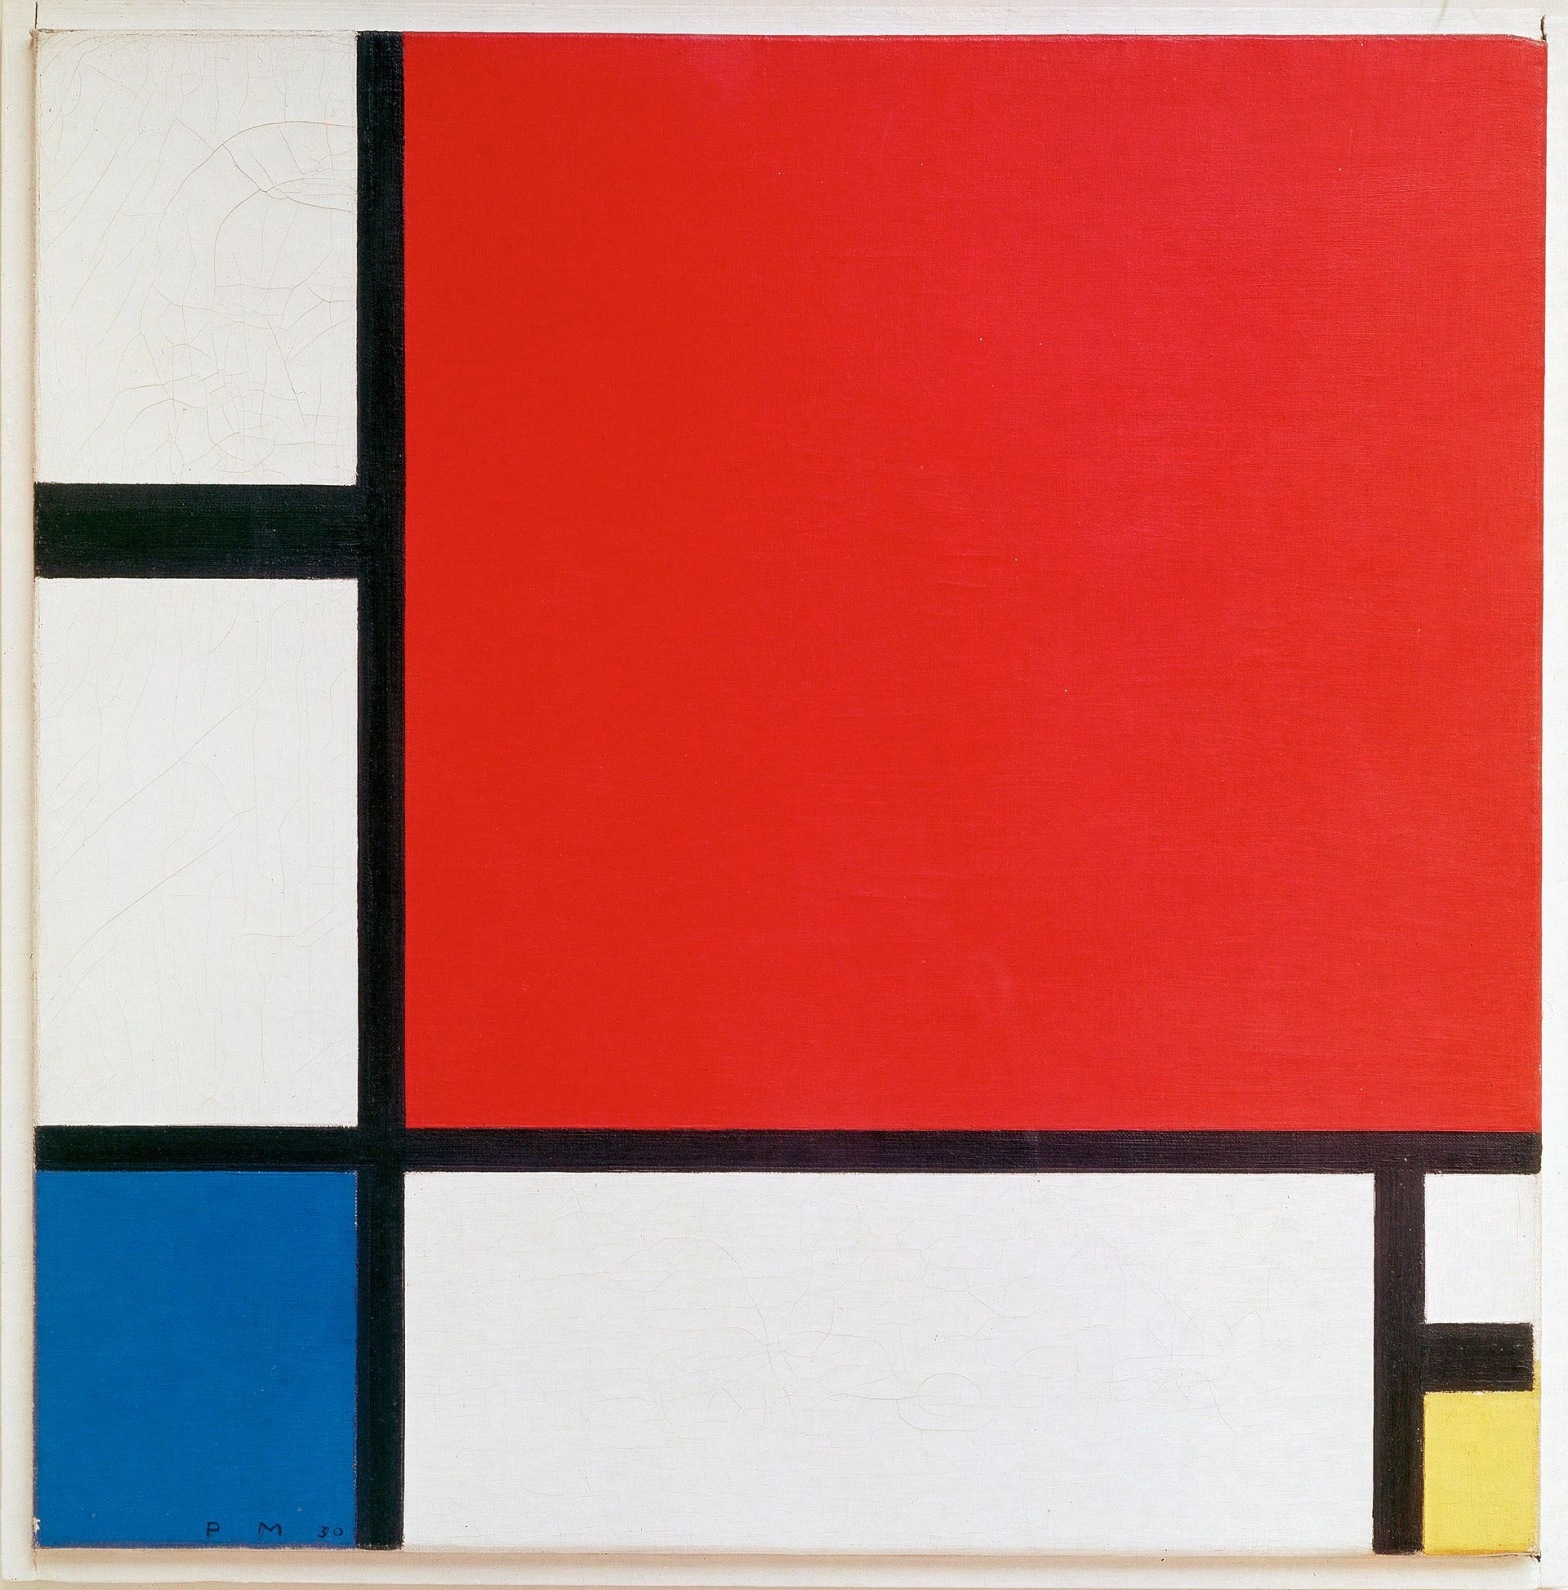 Piet Mondrian, Composition with Red, Blue, and Yellow